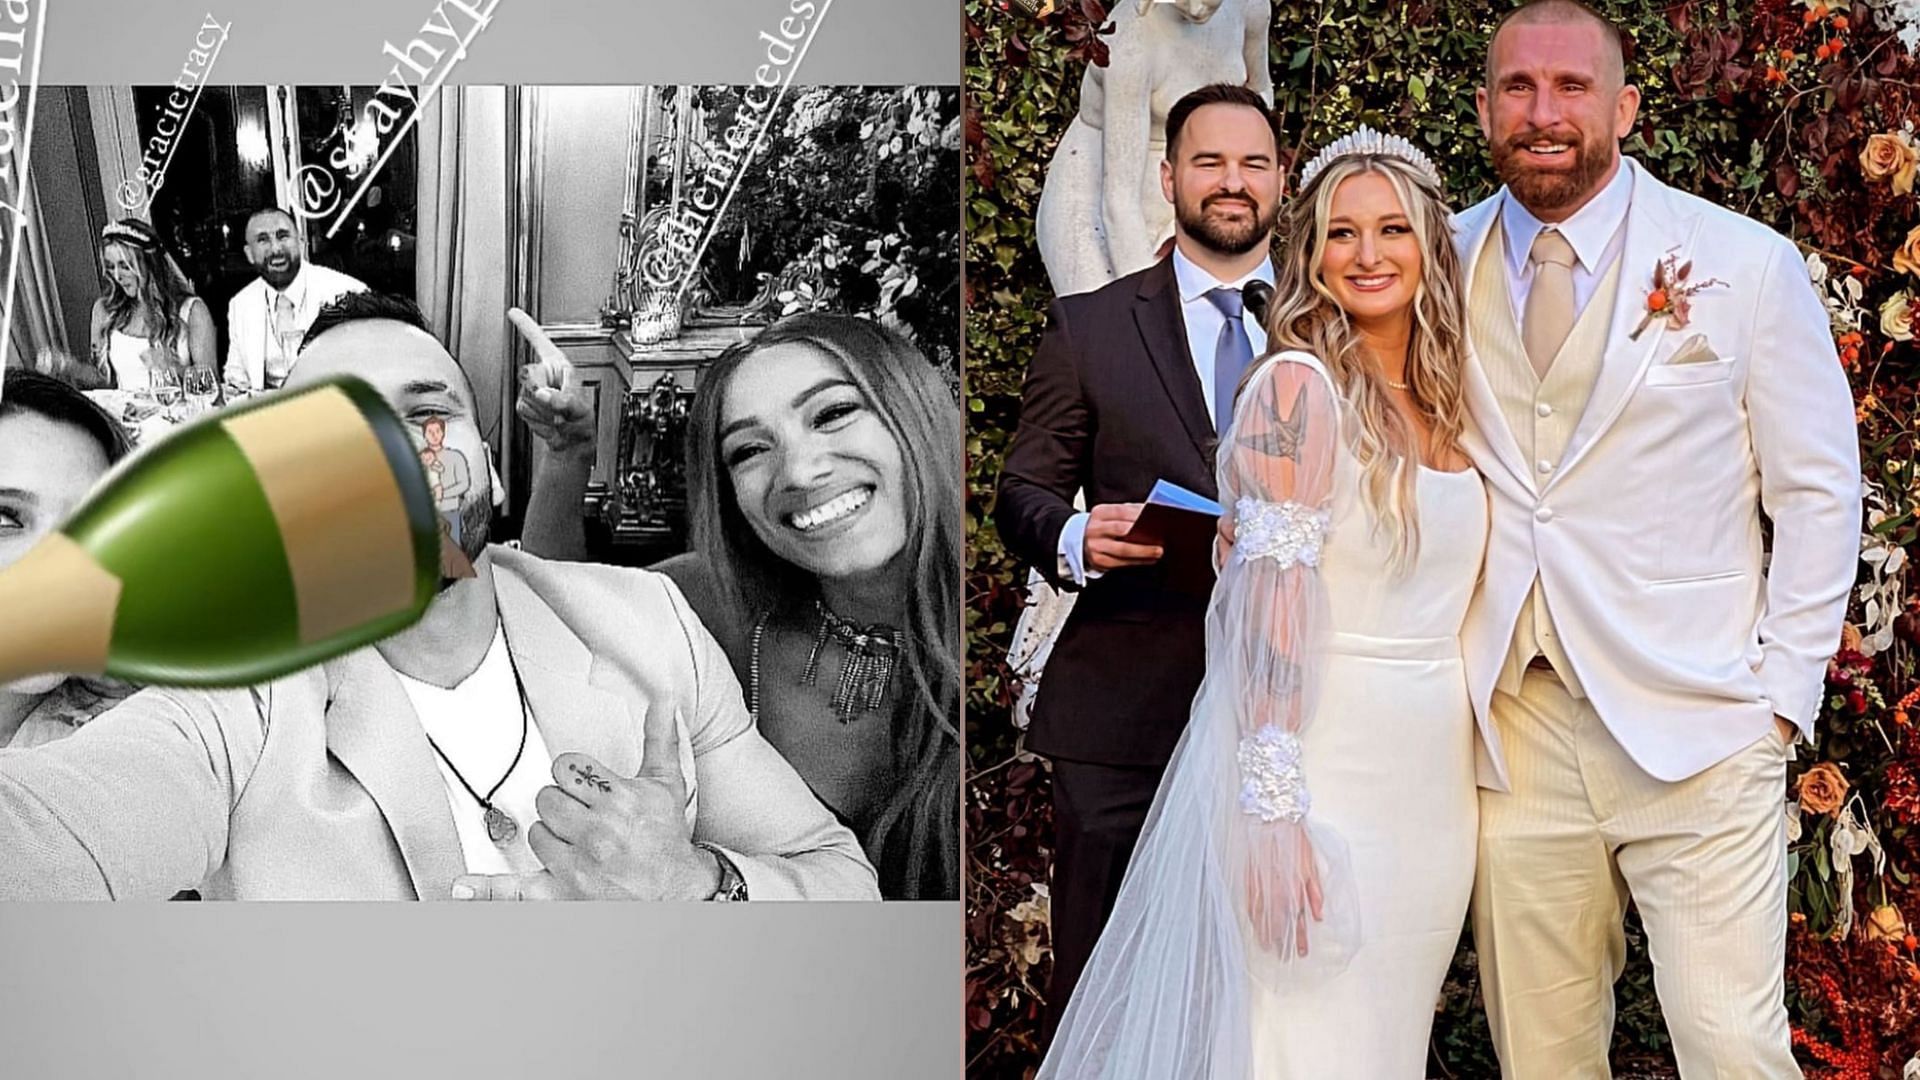 Mojo Rawley tied the knot with his longtime girlfriend